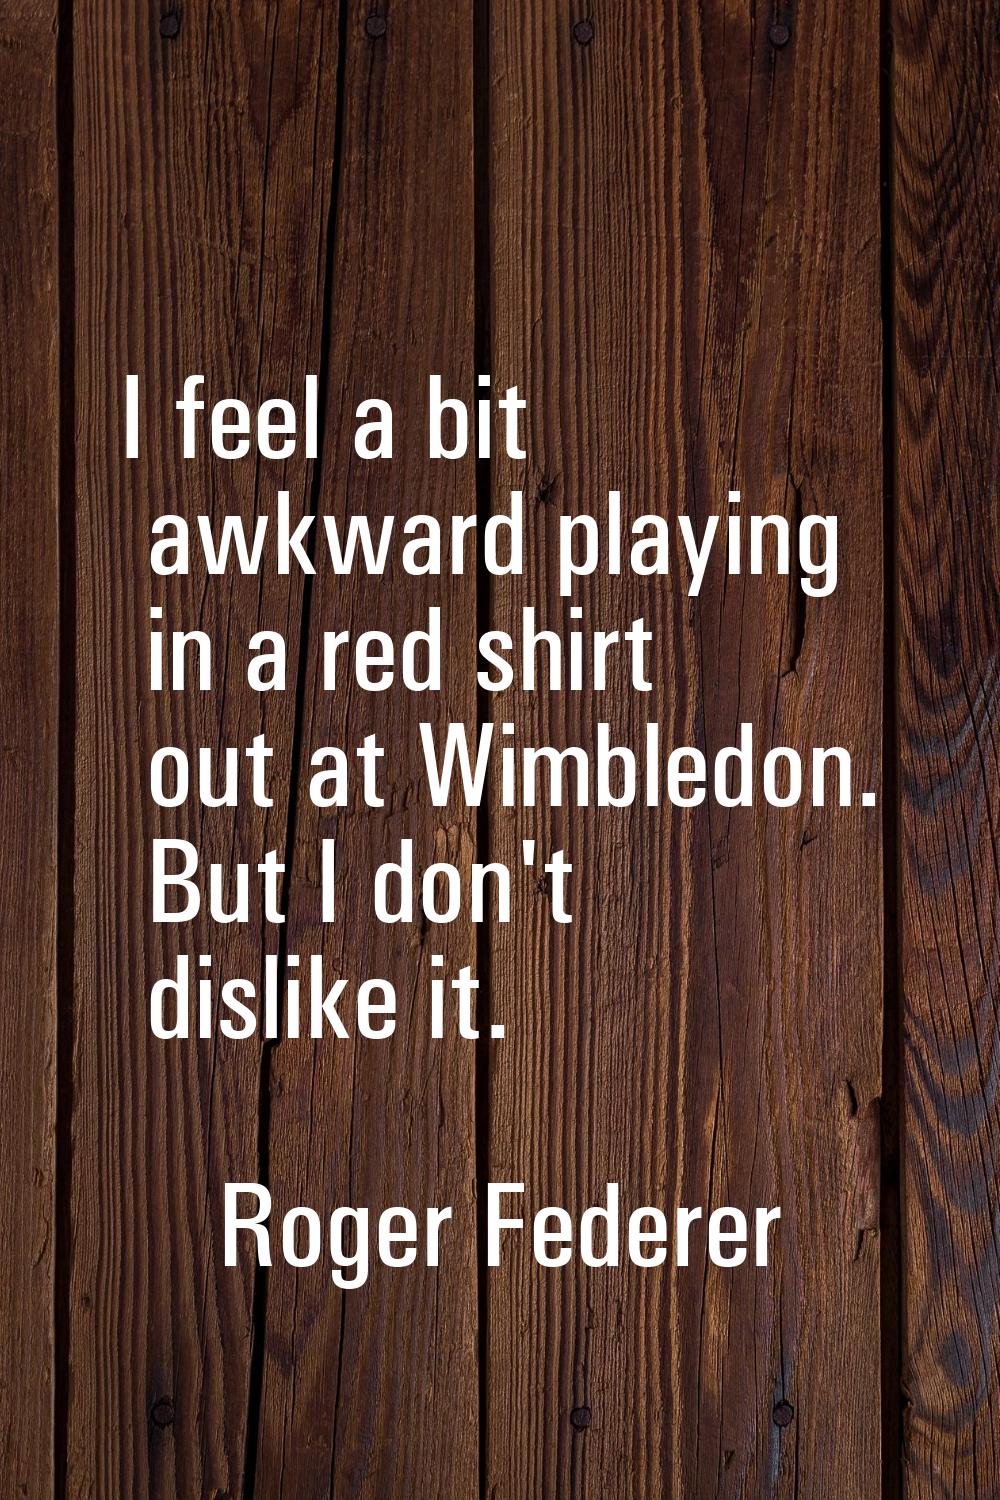 I feel a bit awkward playing in a red shirt out at Wimbledon. But I don't dislike it.